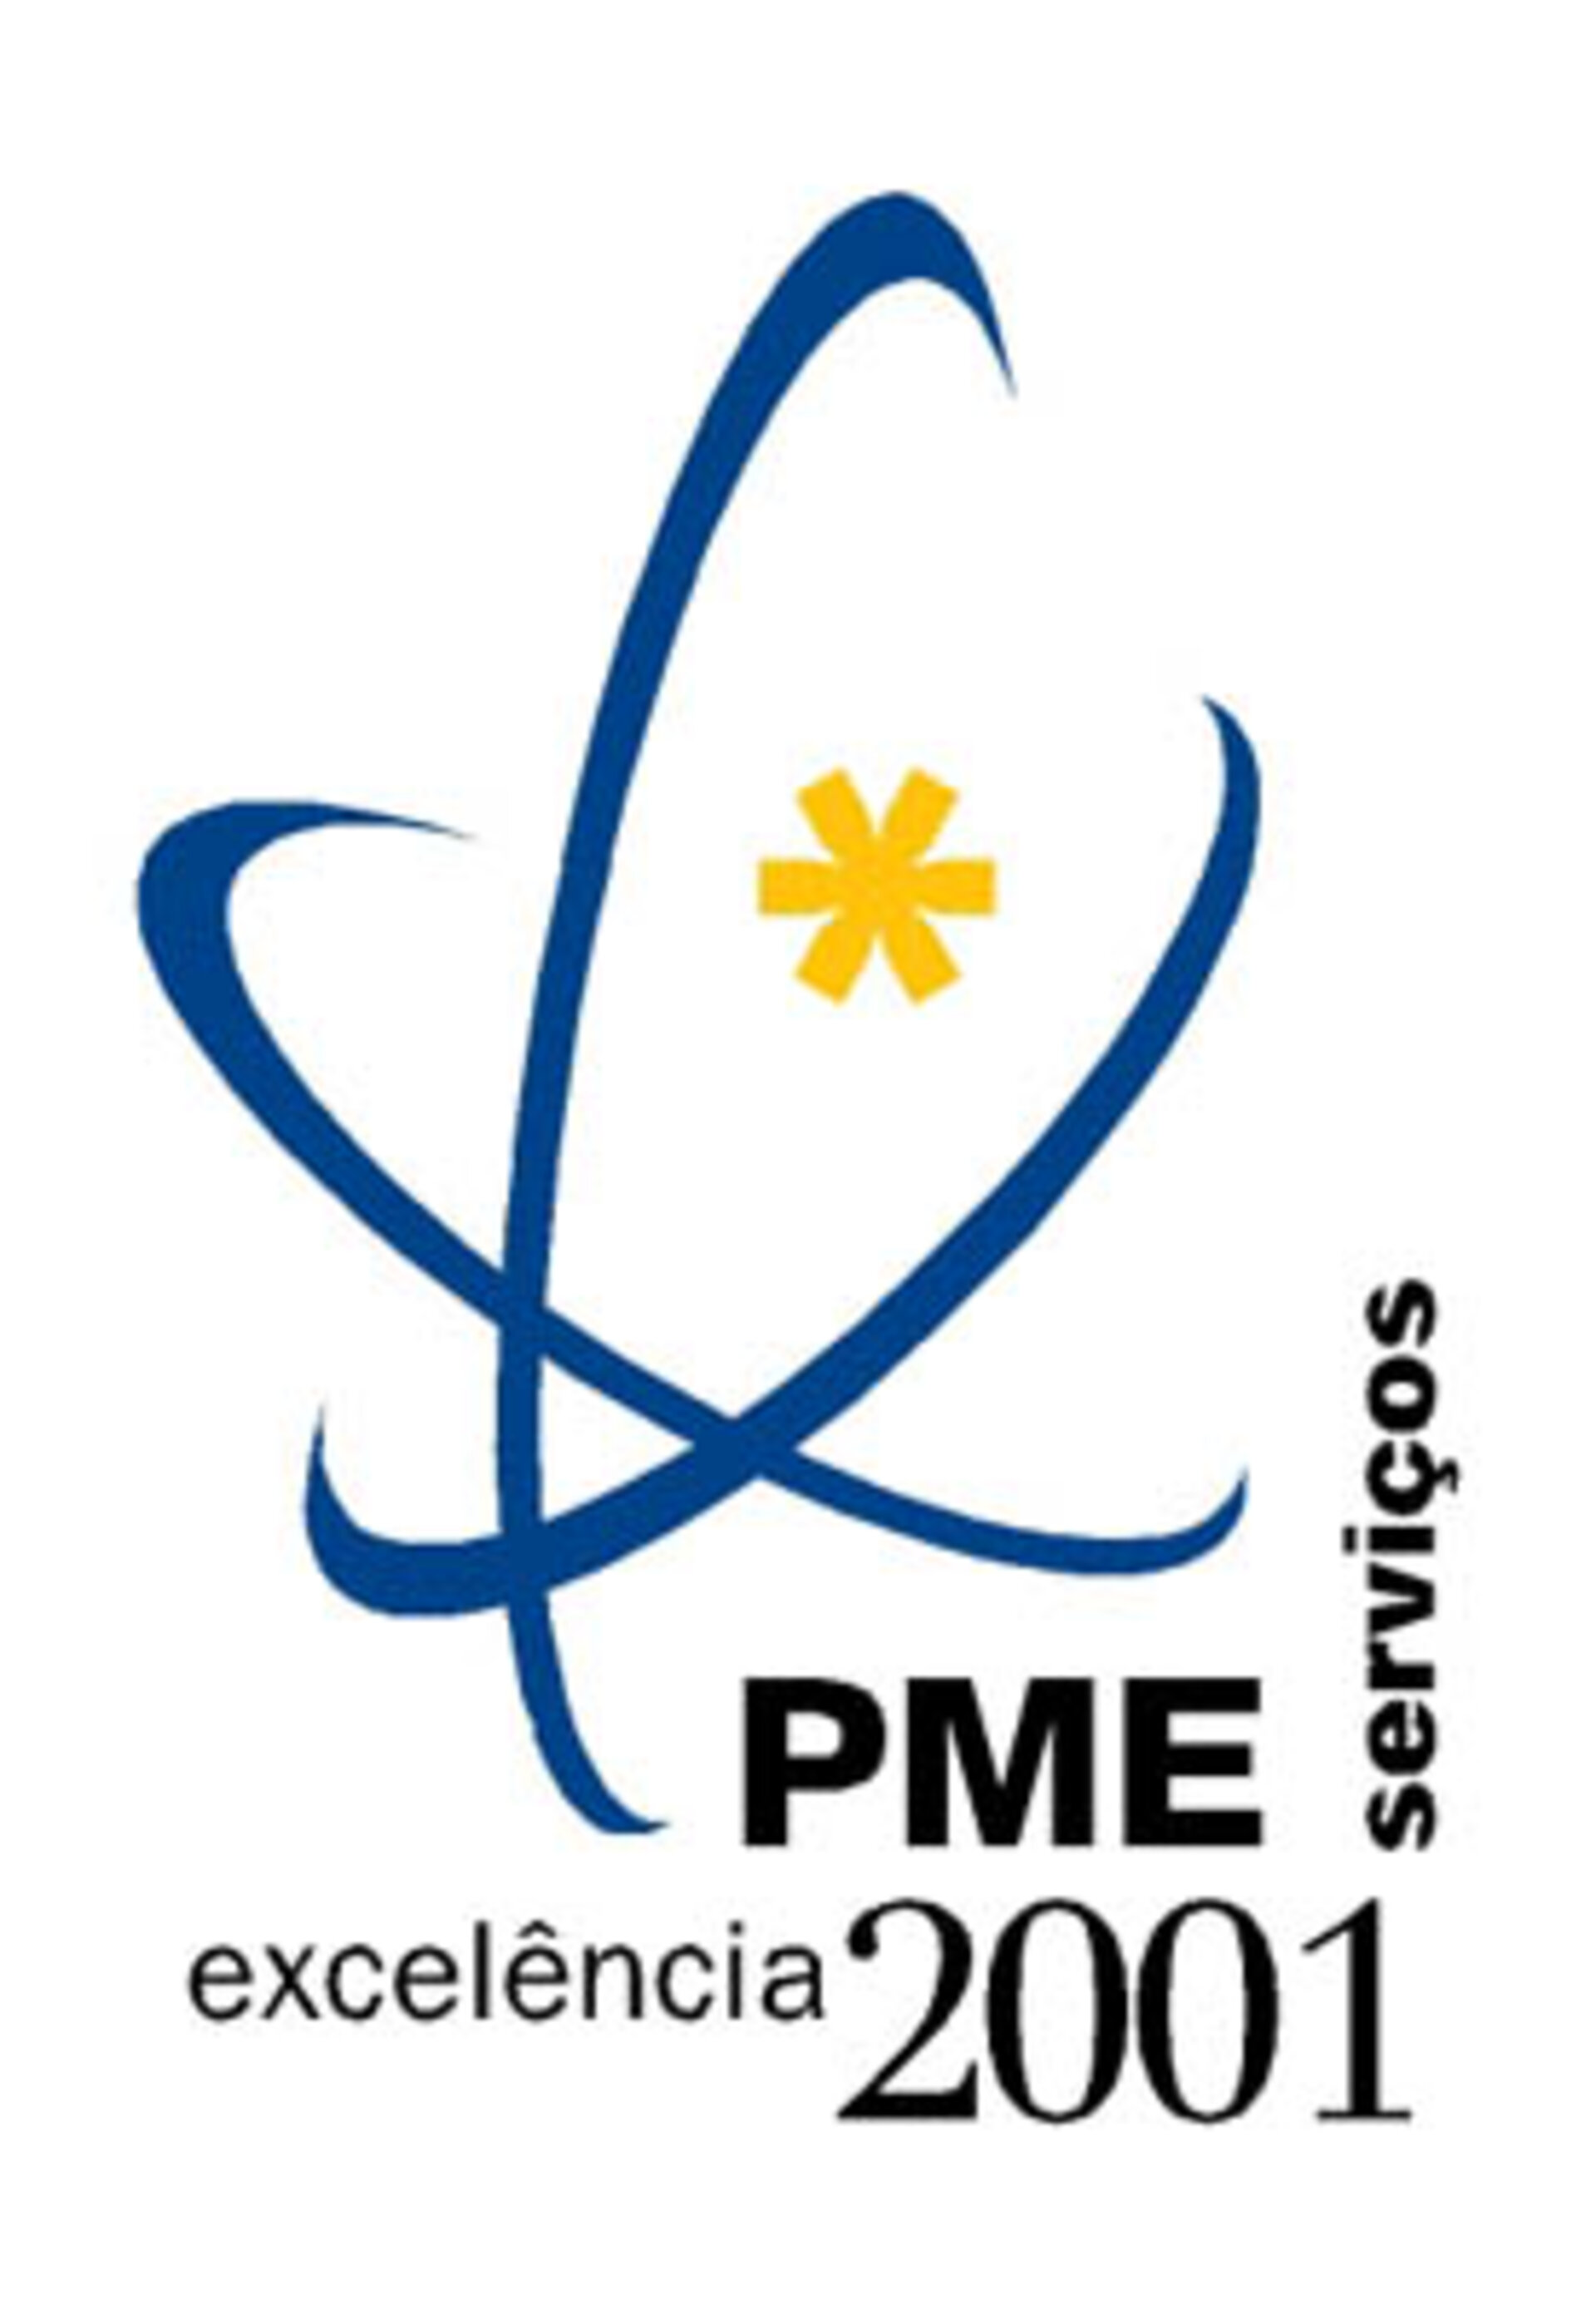 Critical Software received the SME Excellency 2001 award